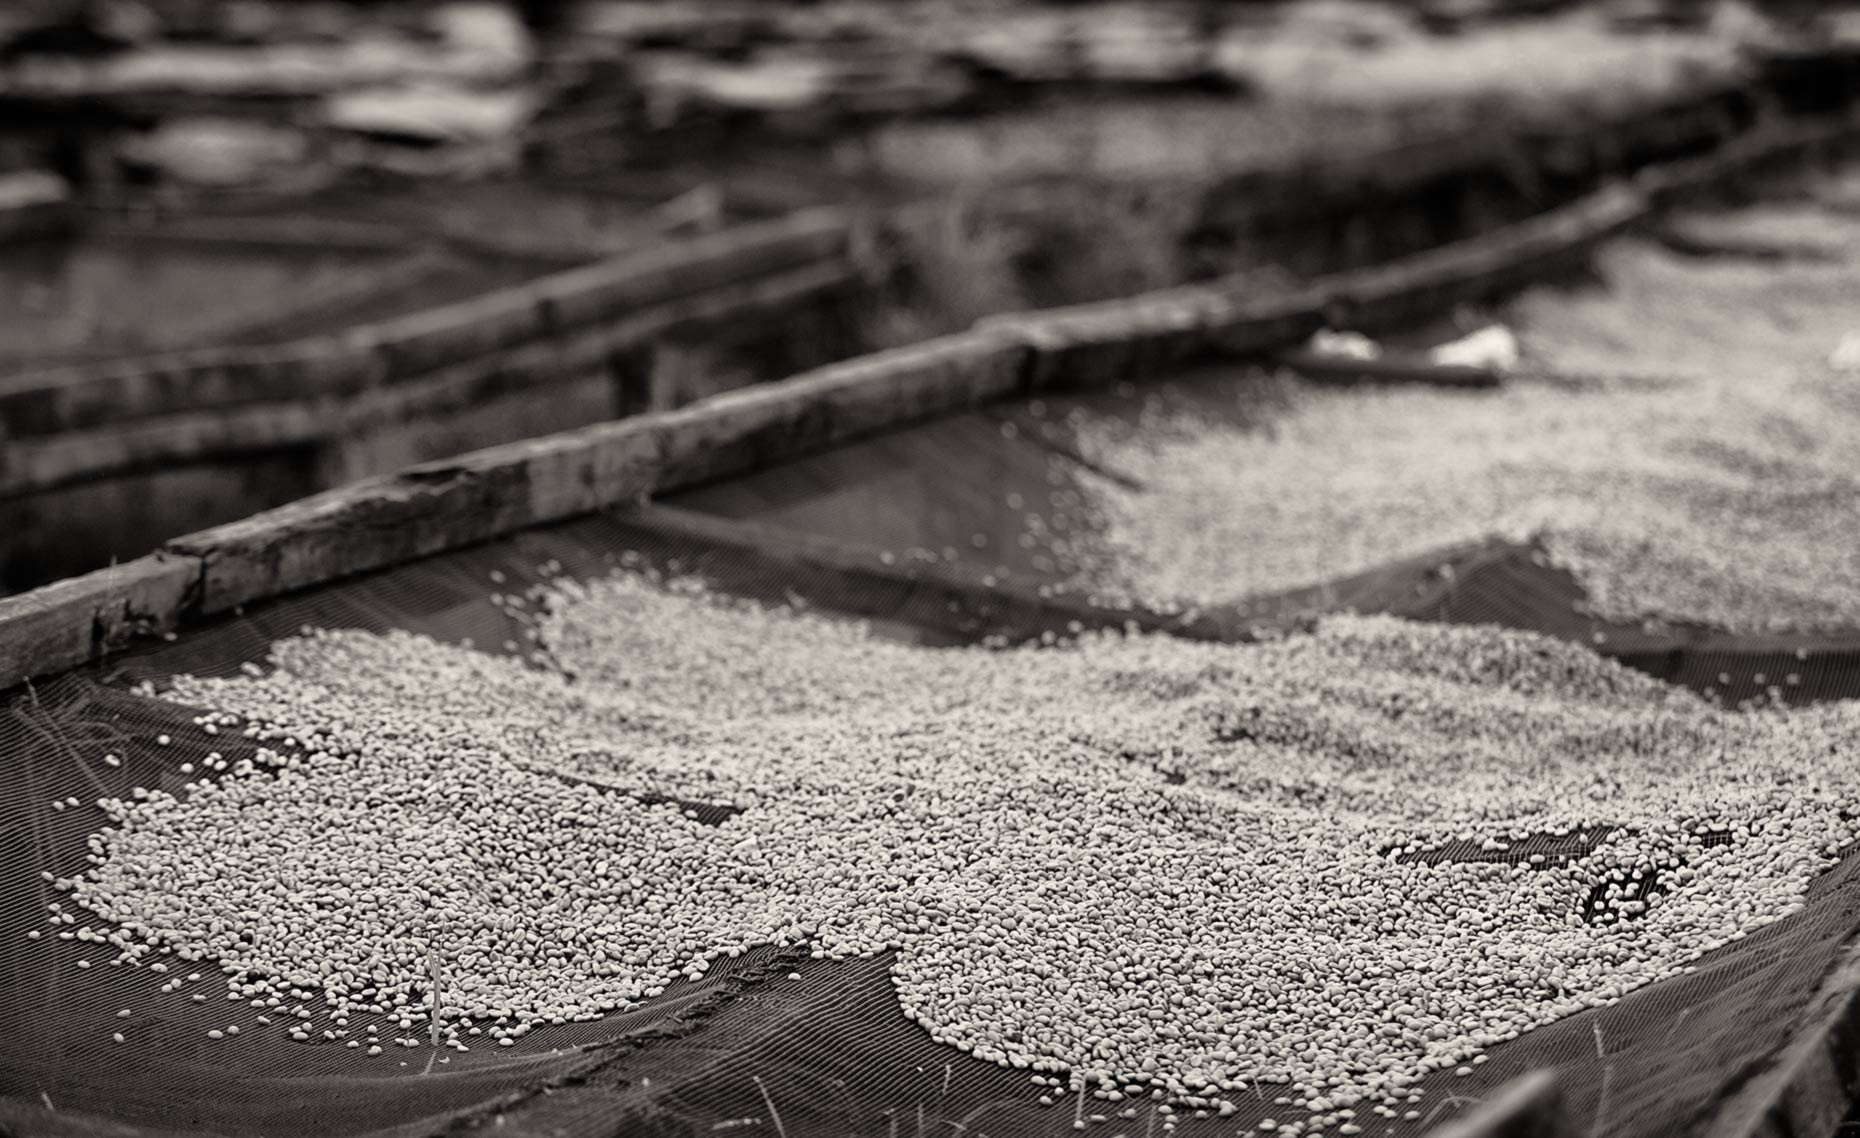 Dried coffee ready to sort at a coffee farm in Kenya. Agriculture photography